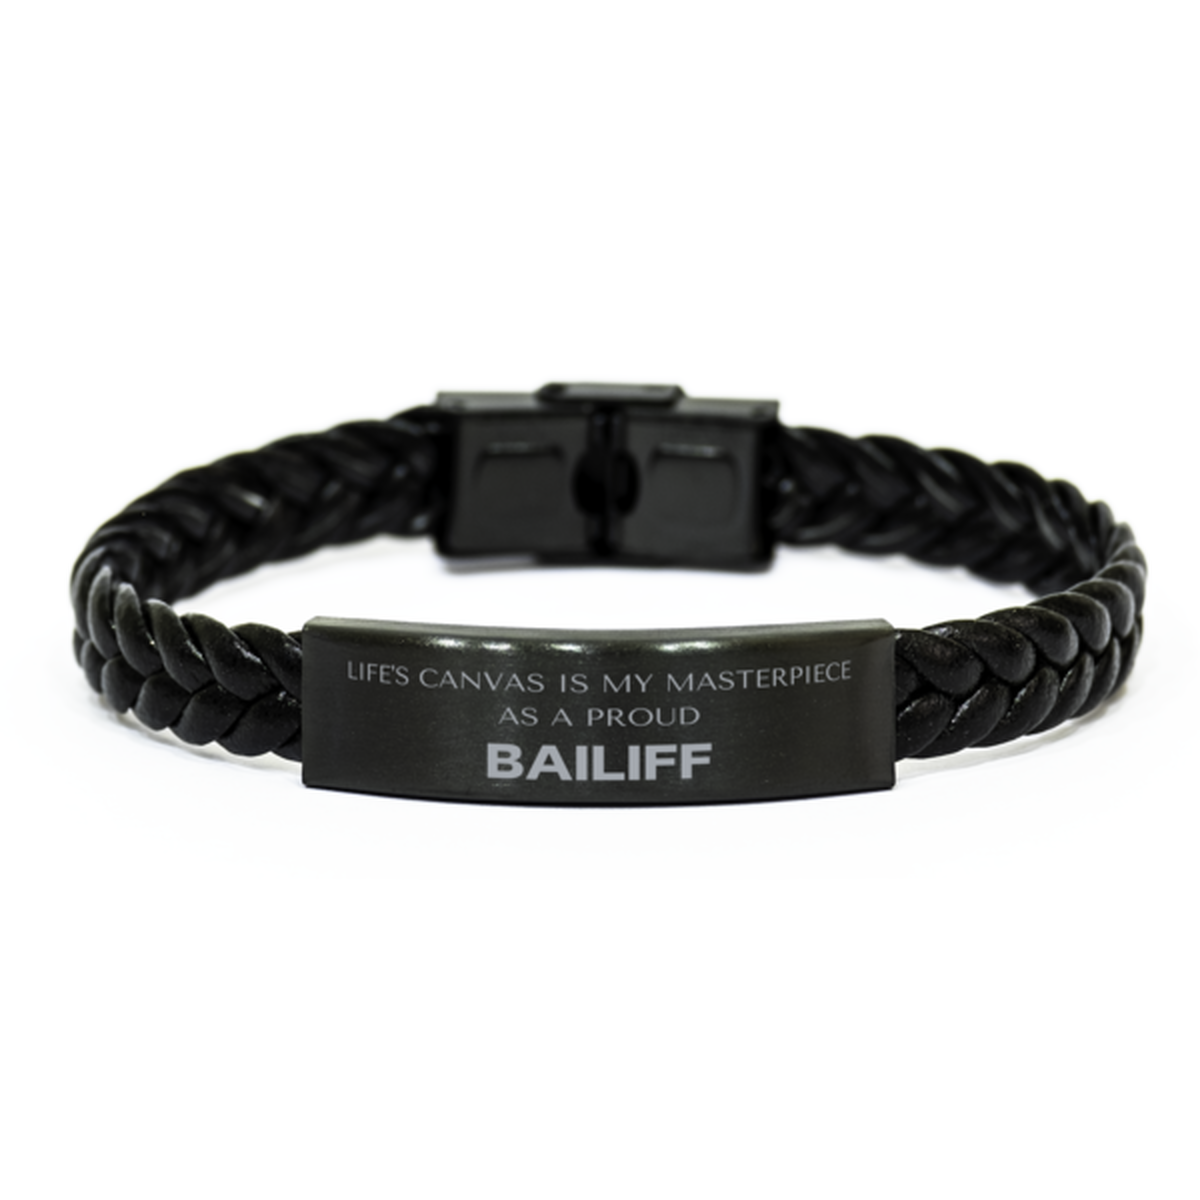 Proud Bailiff Gifts, Life's canvas is my masterpiece, Epic Birthday Christmas Unique Braided Leather Bracelet For Bailiff, Coworkers, Men, Women, Friends